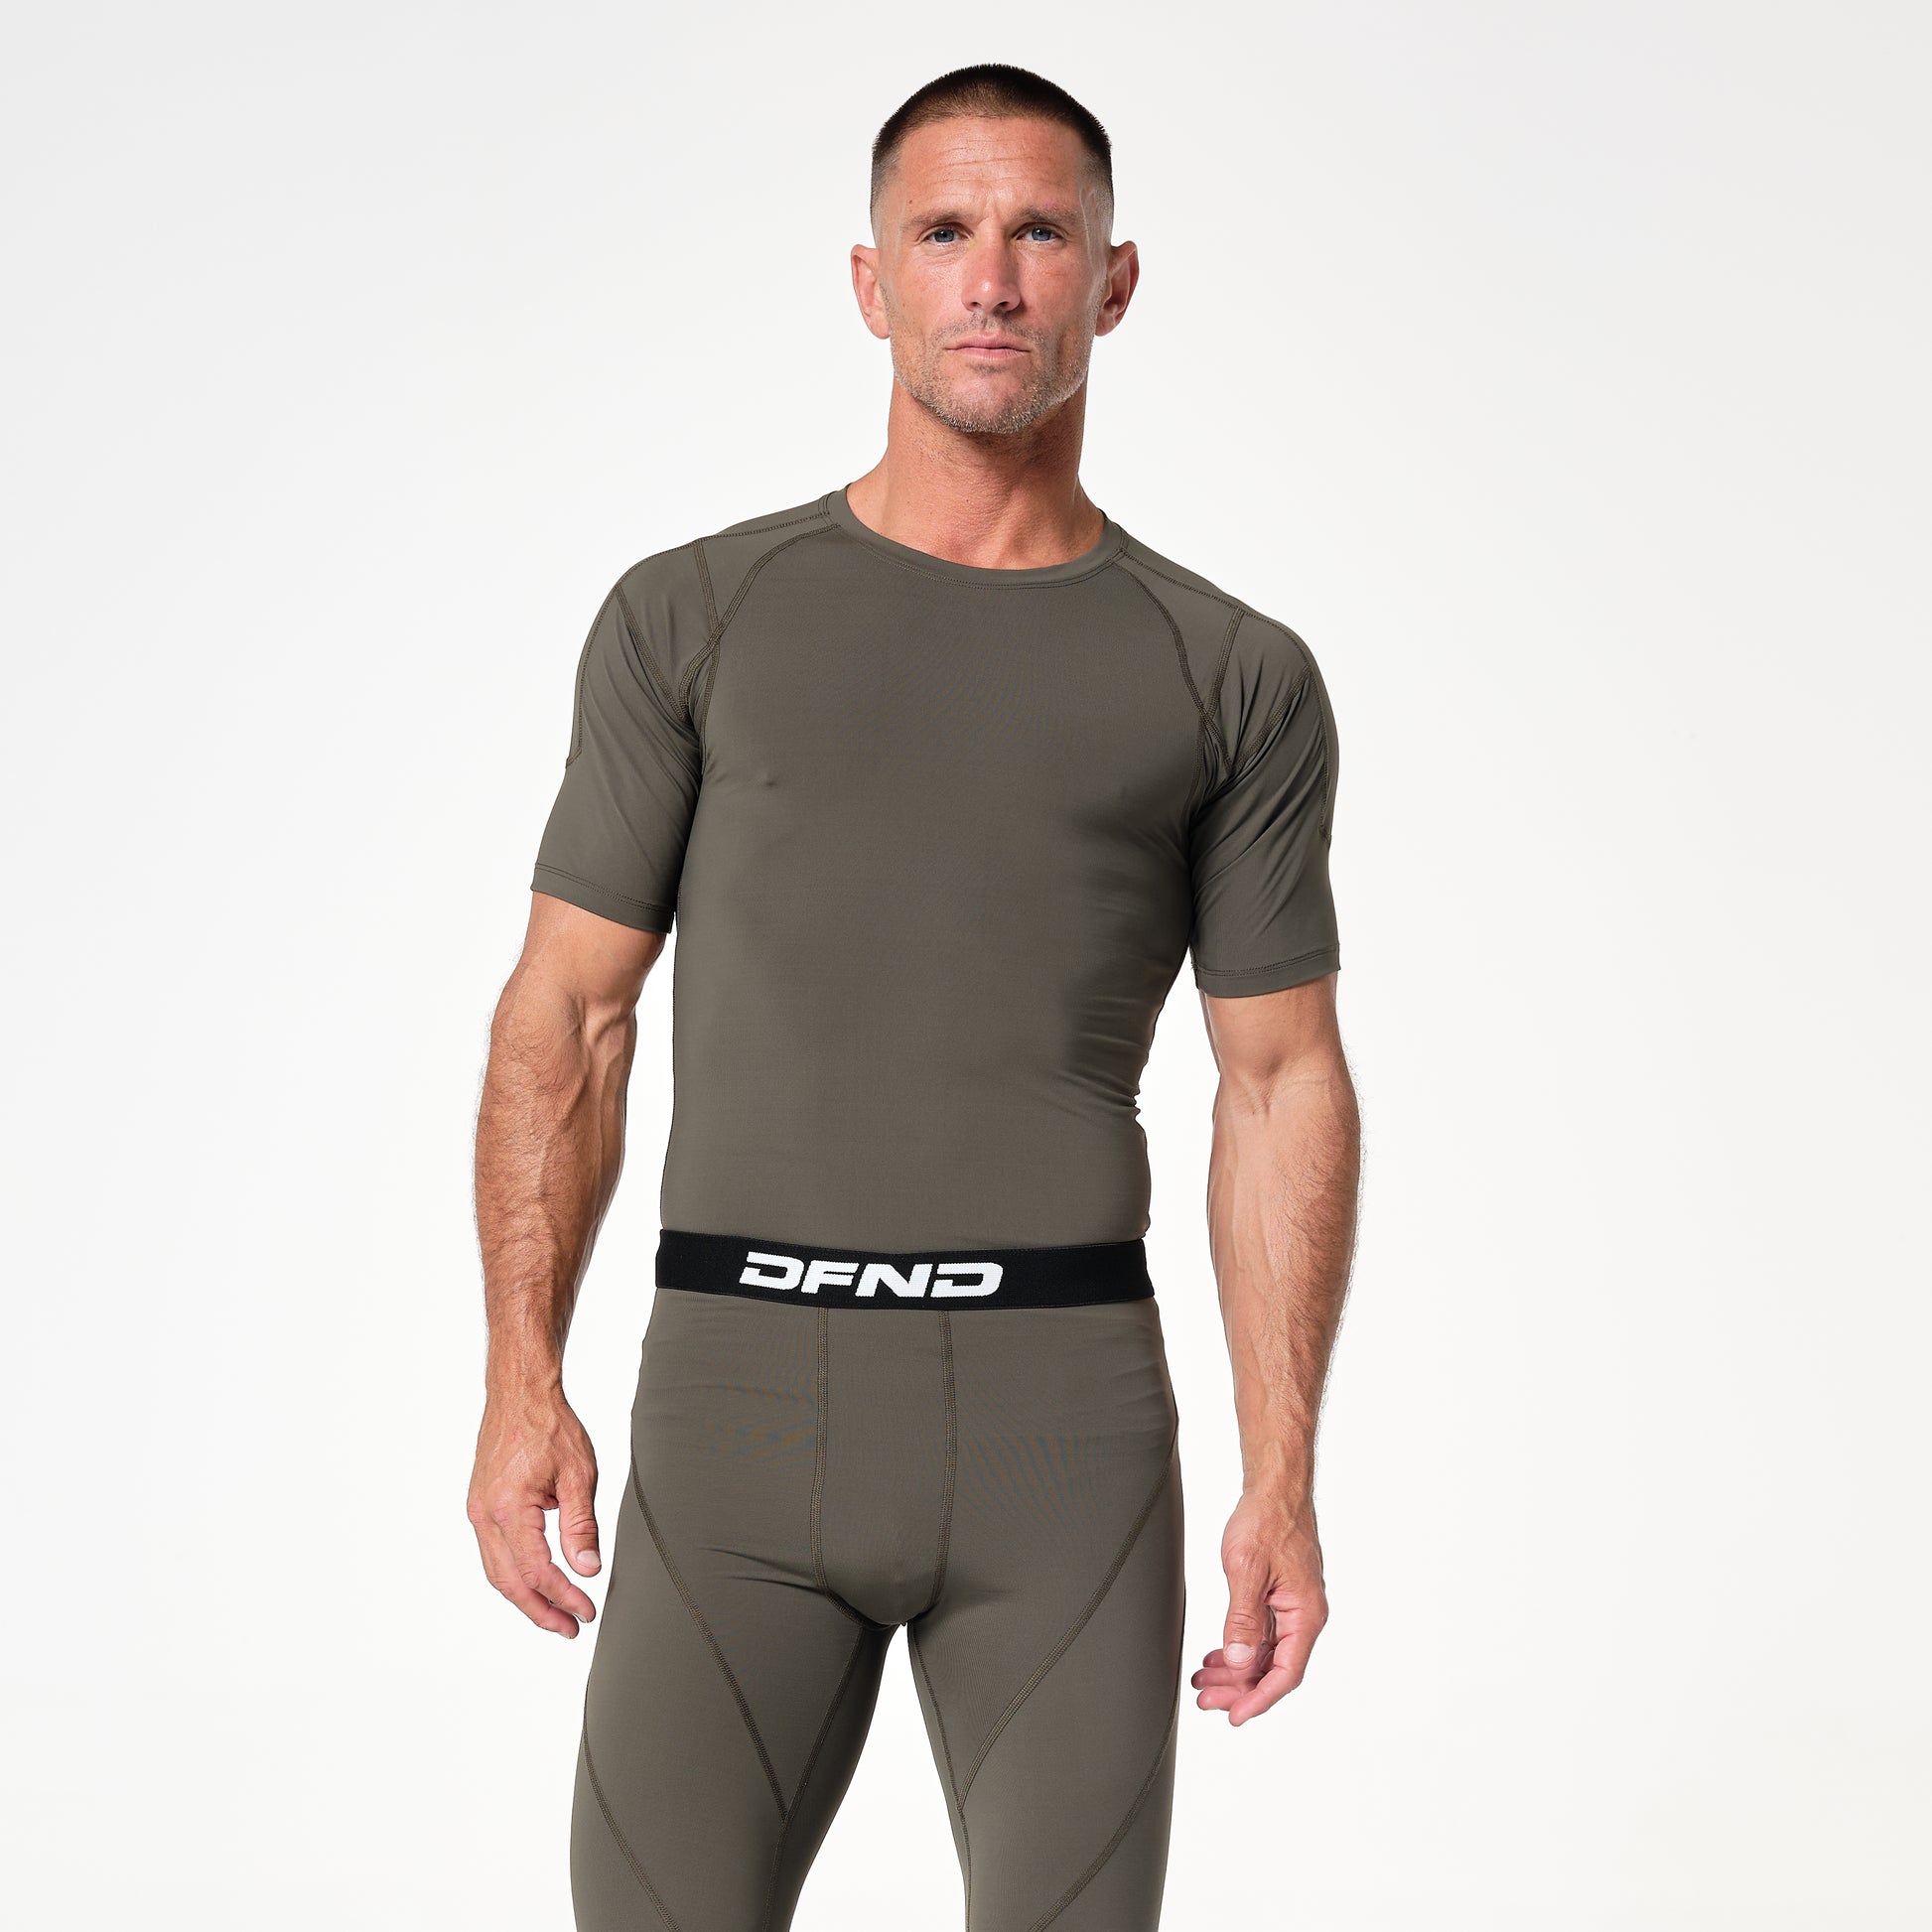 Men's Long Sleeve Compression Shirt – How We Fitness